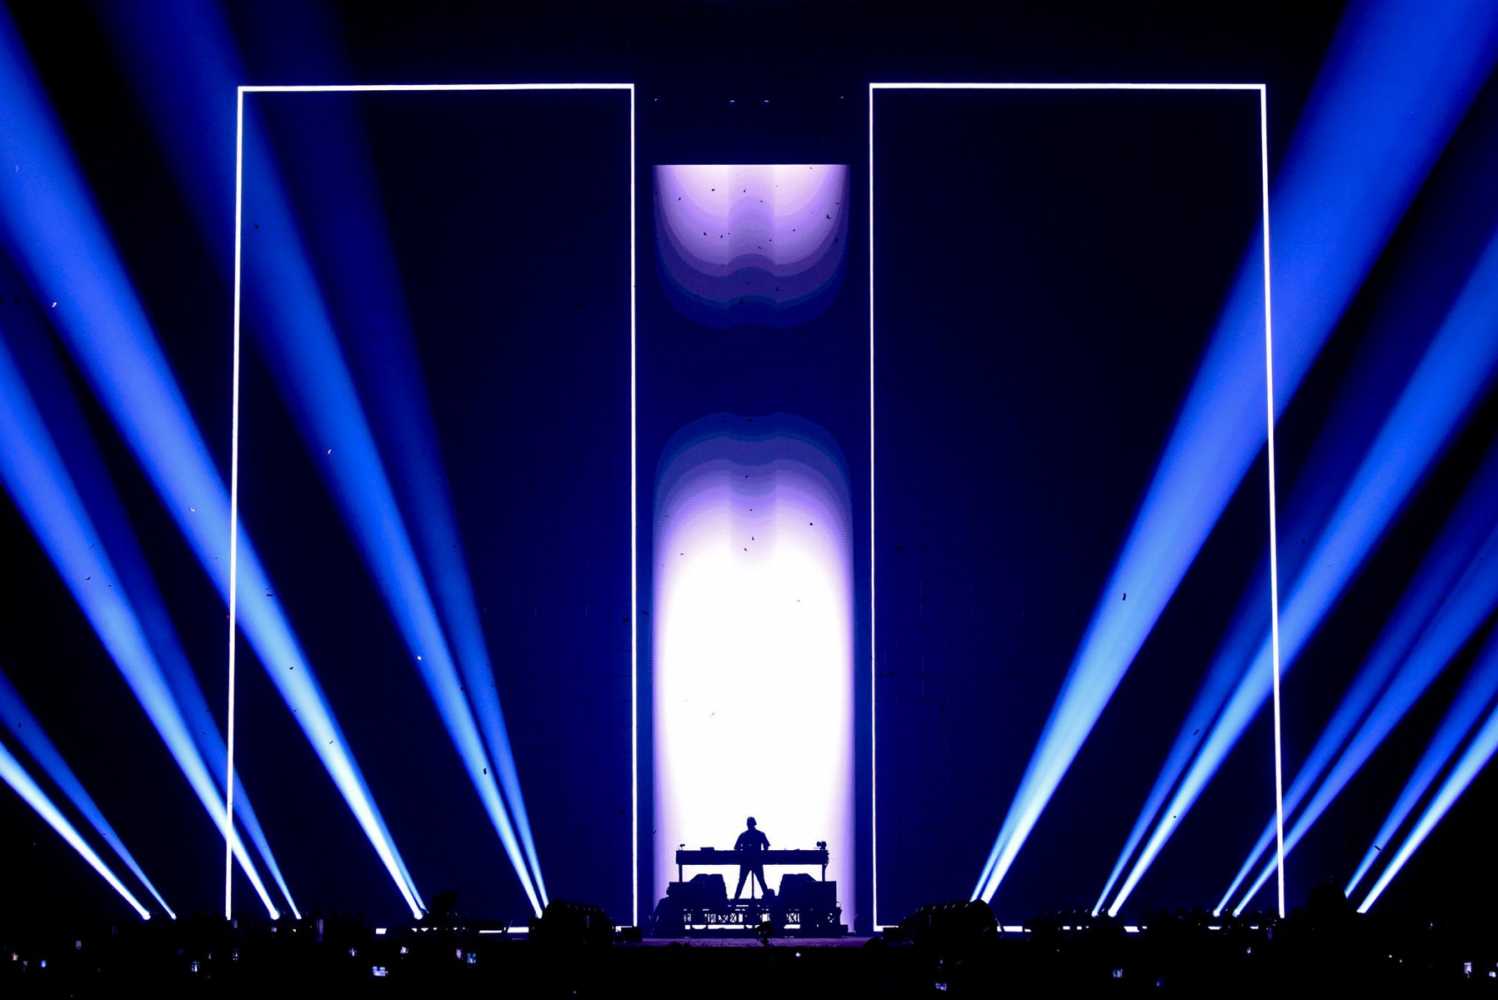 Stunning visuals were created, enhanced by a striking lighting design (photo: @antthonyghnassia)